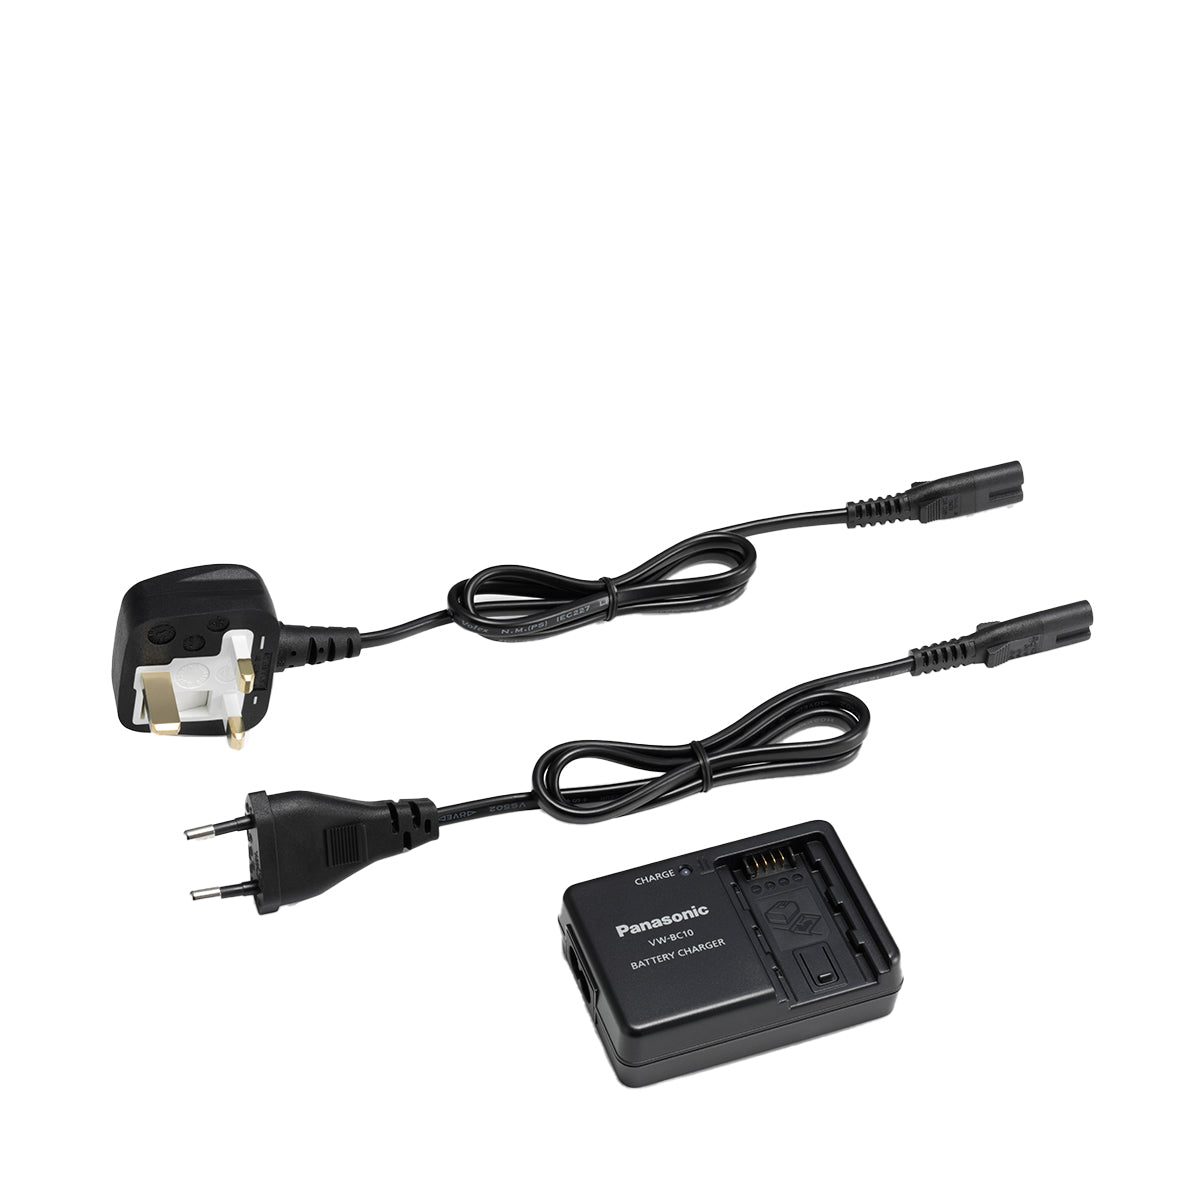 Battery Charger - VW-BC10